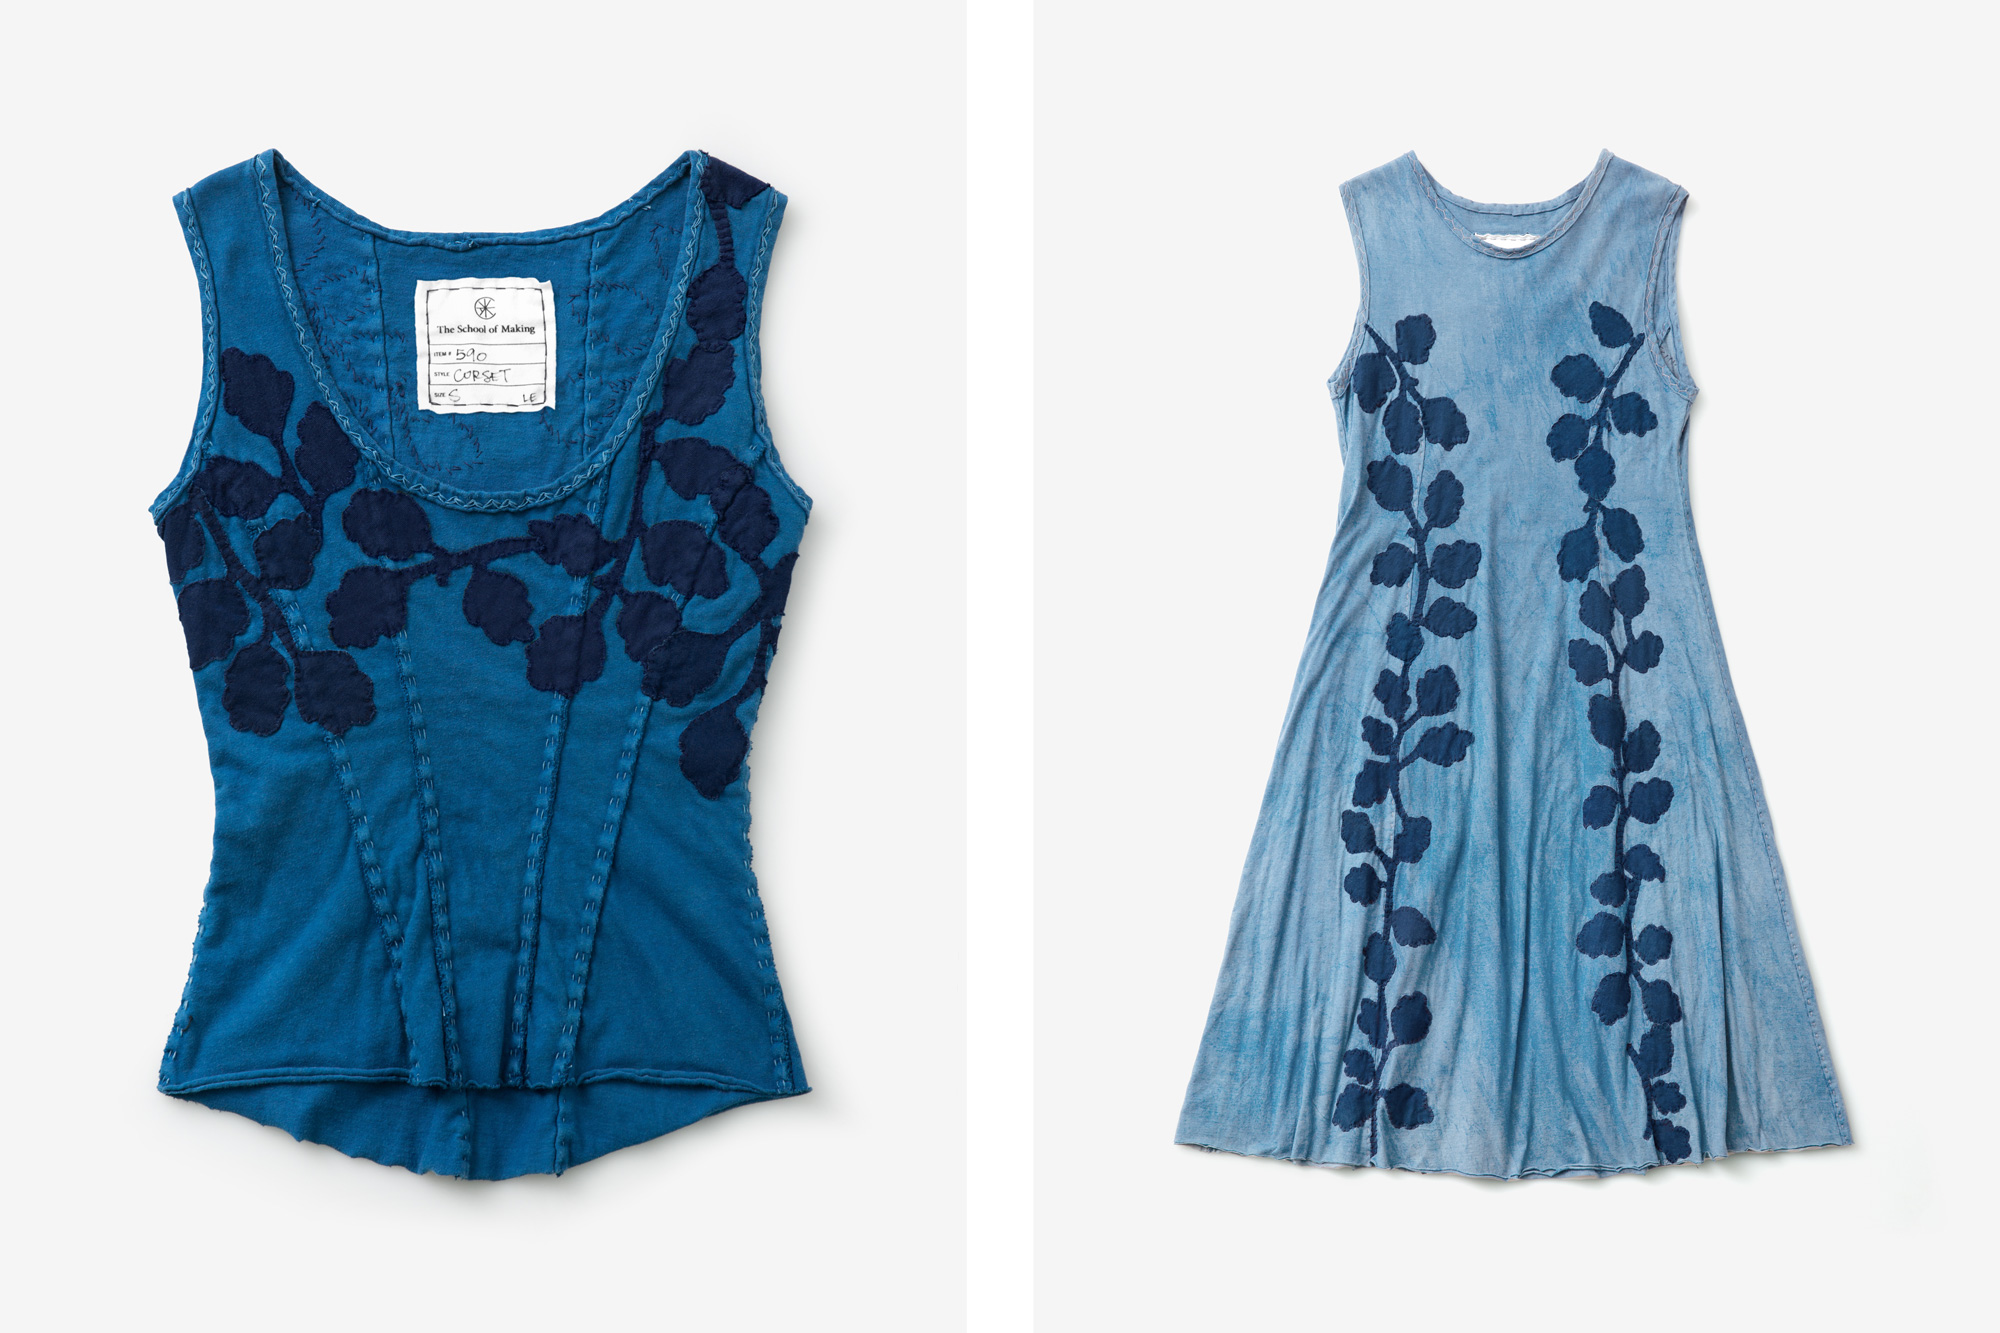 The indigo corset kit and indigo factory dress kit with new leaves appliqué.